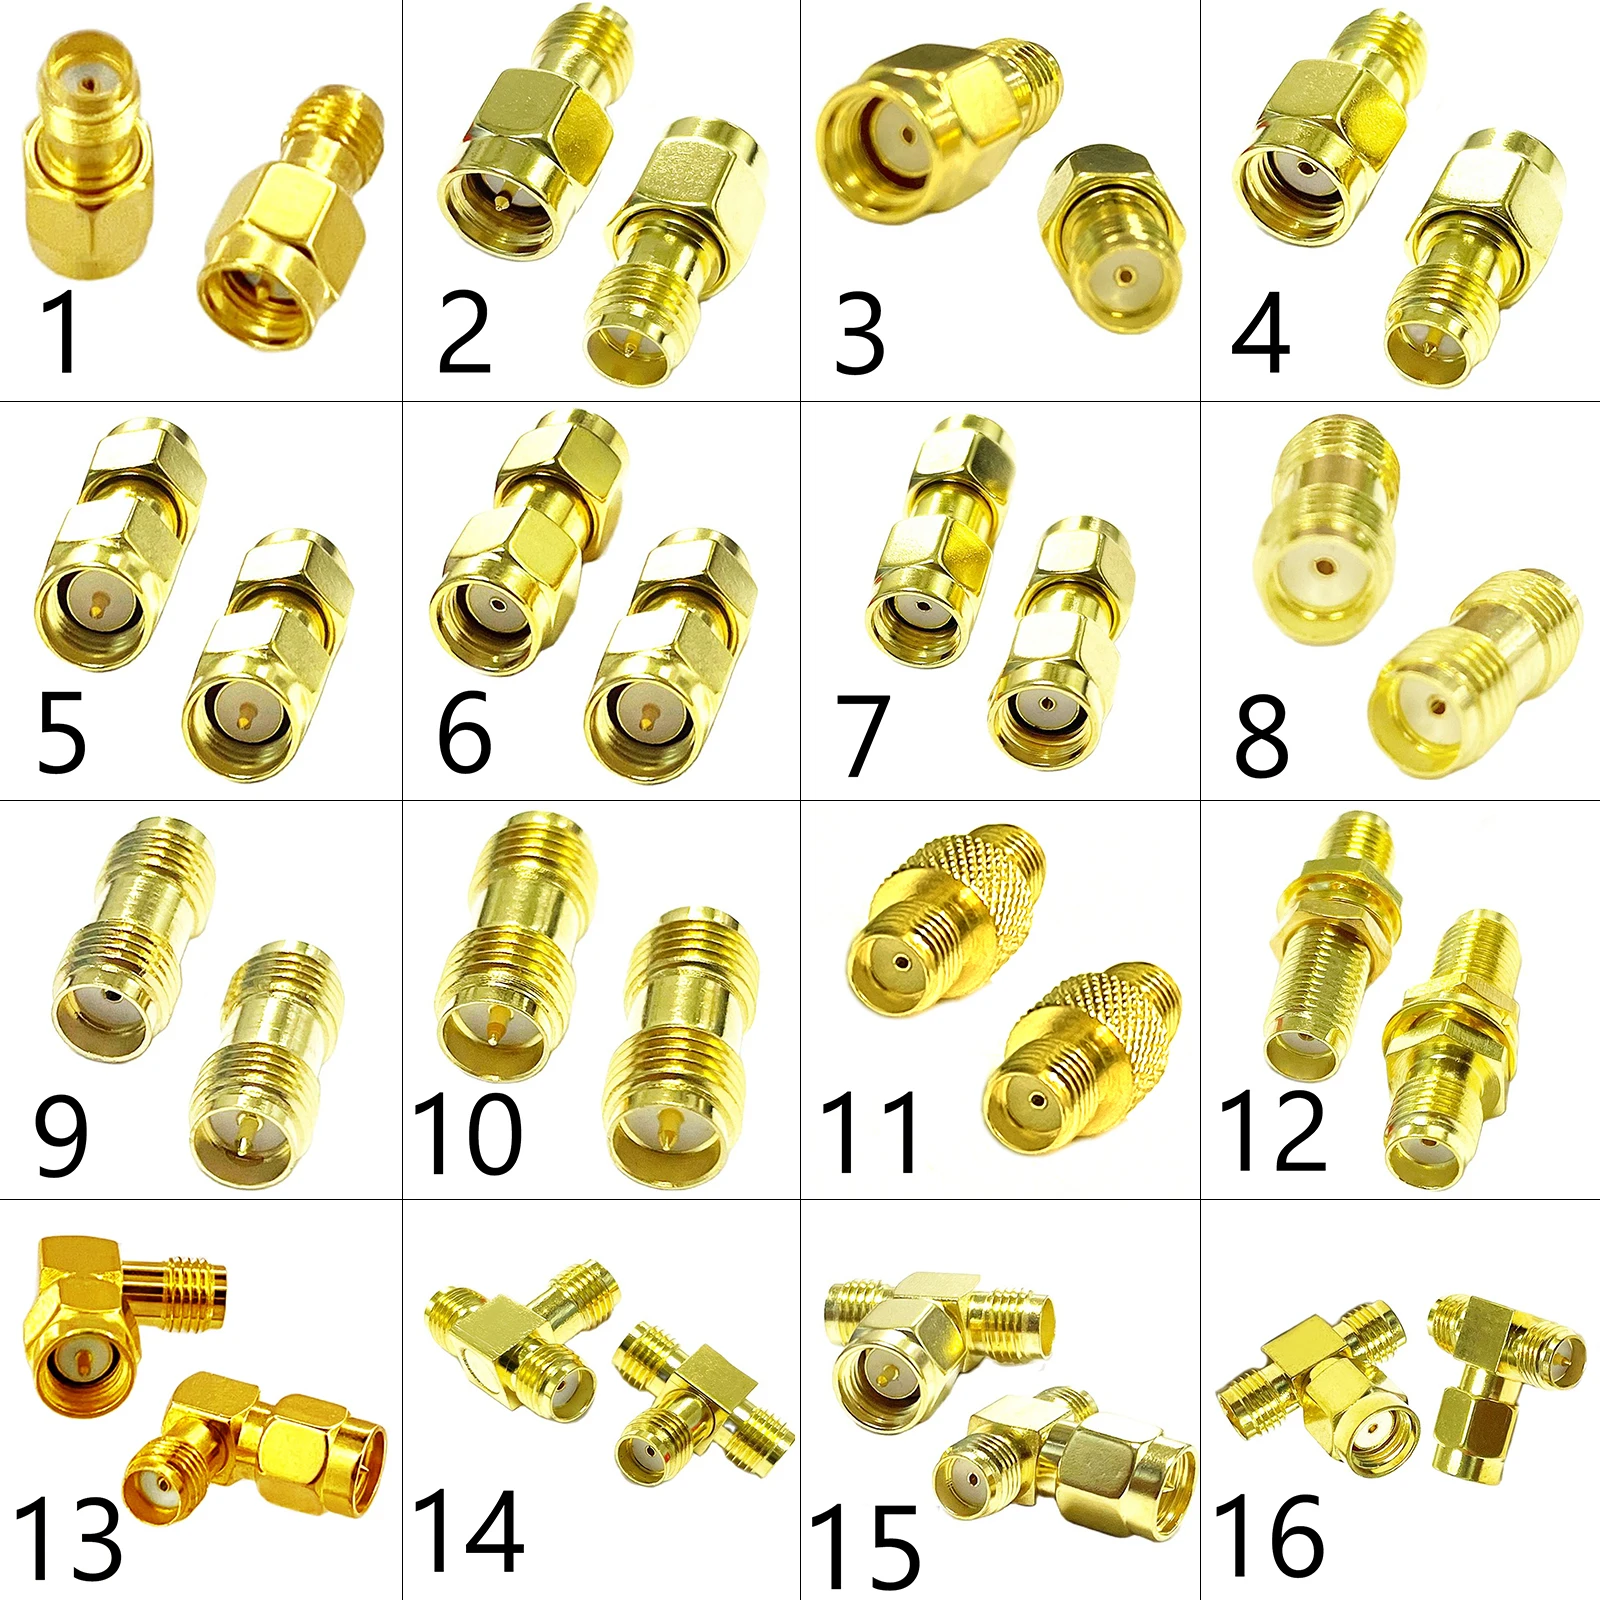 dexmrtic-1pc-sma-male-female-rf-coax-adapter-connector-straight-right-angle-t-type-splitter-goldplated-new-wholesale